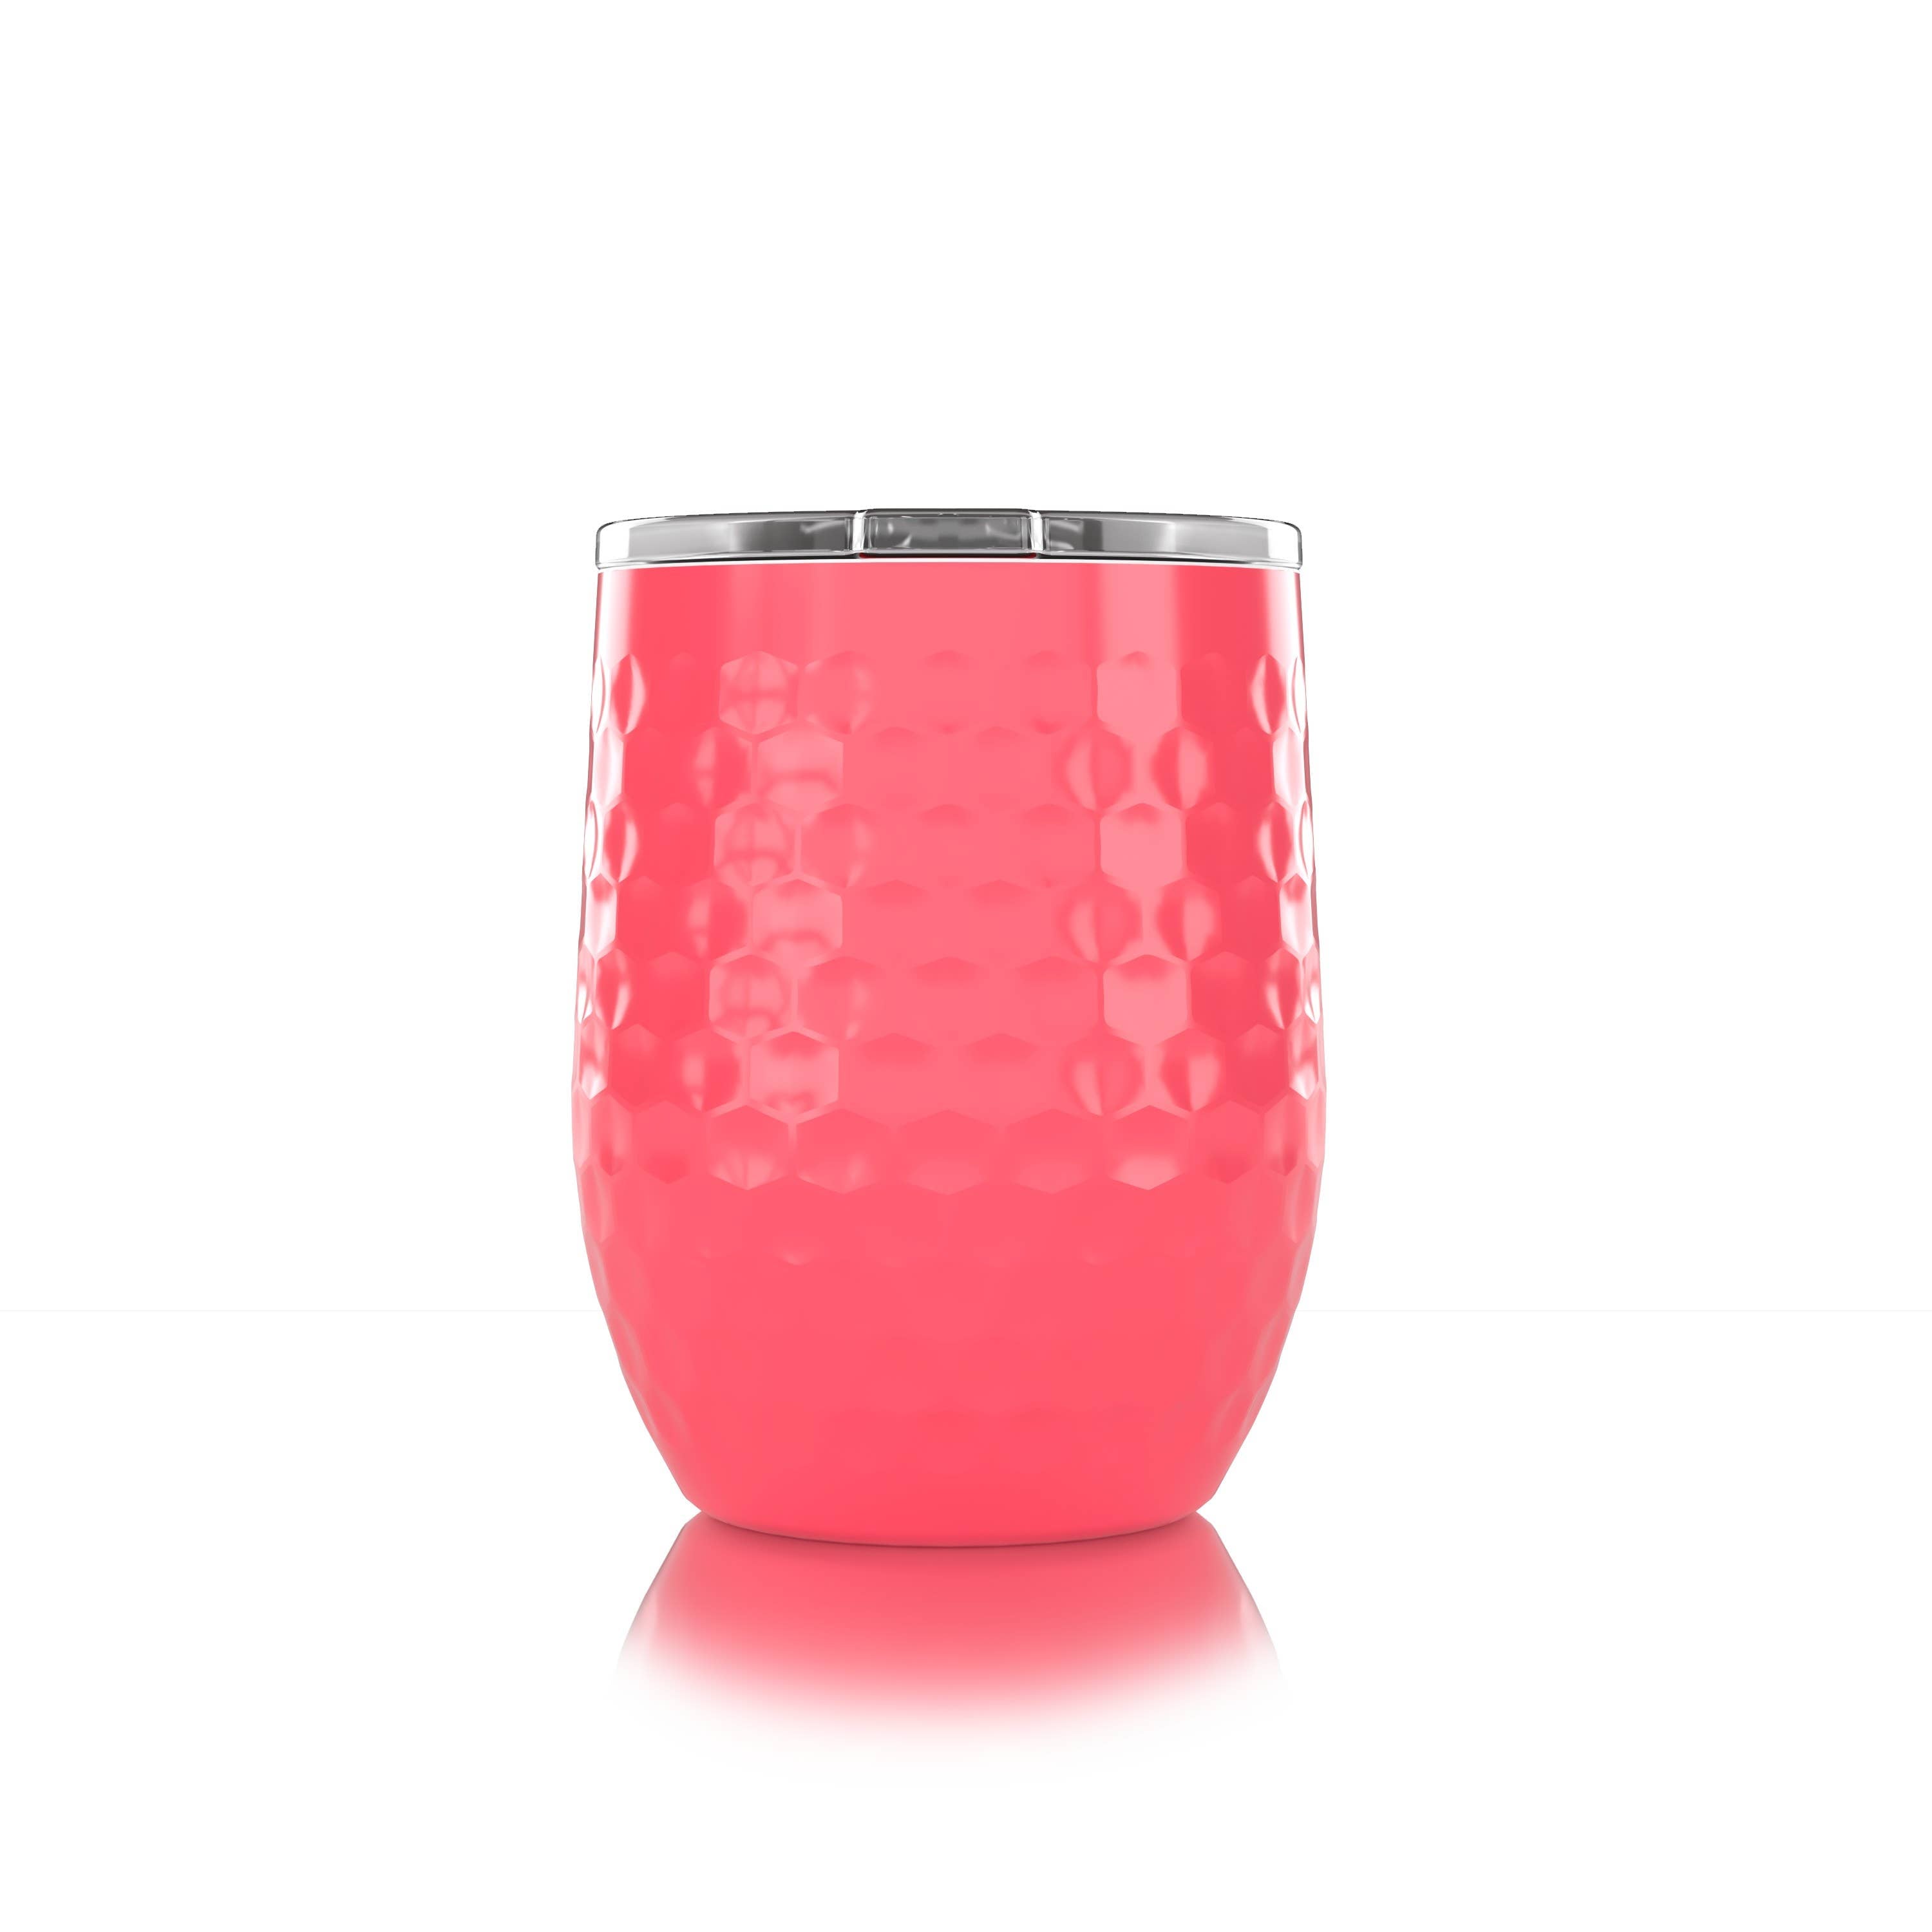 SALE! - 16 oz Dimpled Golf® Pink Stainless Steel Wine Tumbler